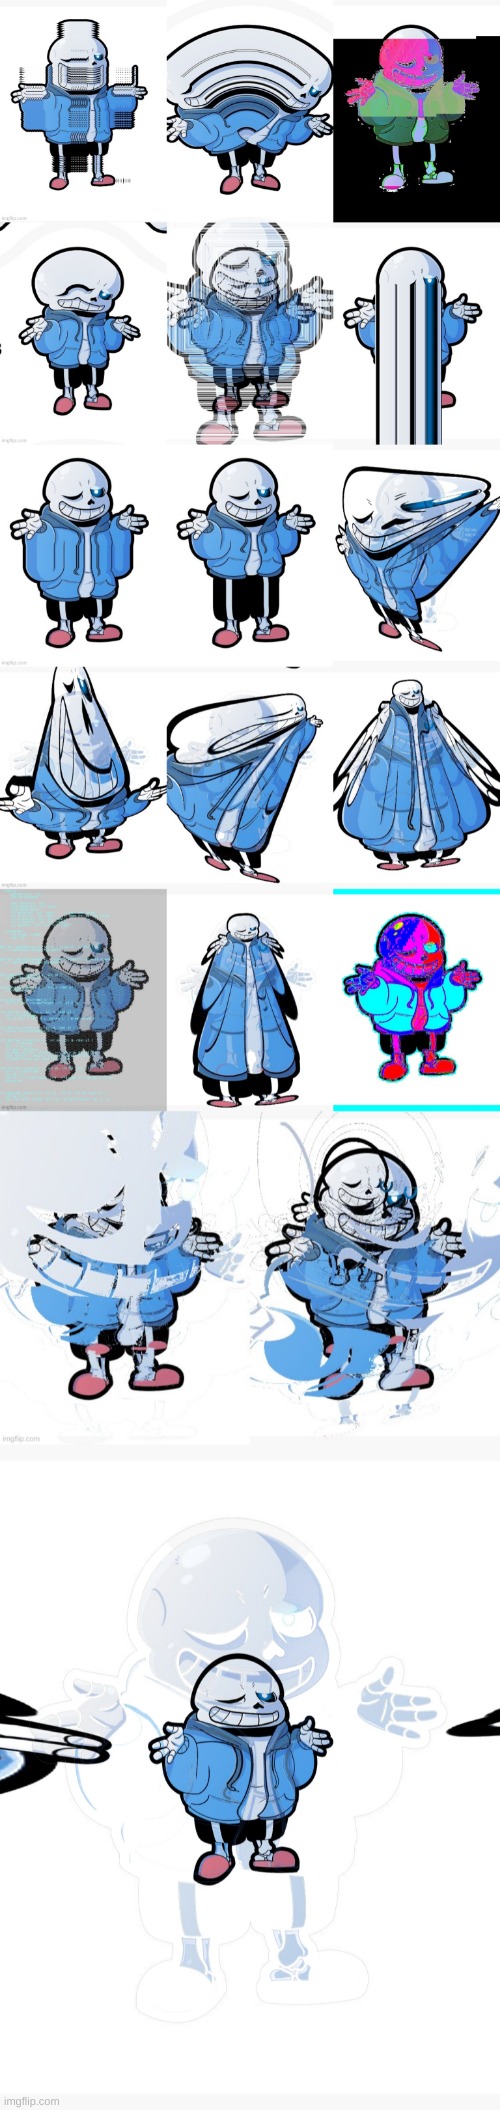 Undertale Cursed Images | image tagged in undertale,sans,cursed image | made w/ Imgflip meme maker